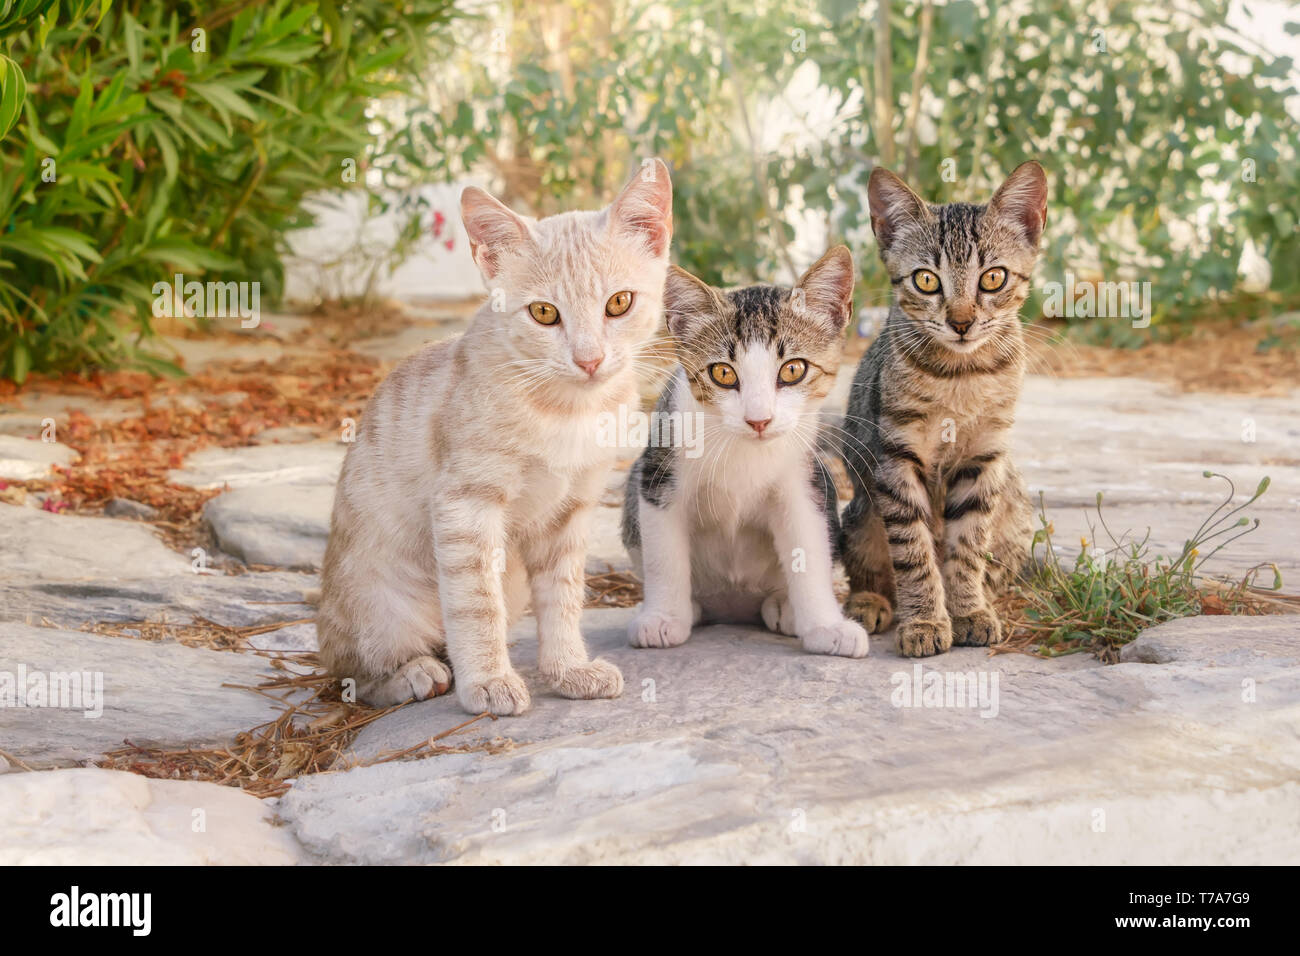 Three curious baby cat kittens, different coat colors shorthair, sitting side by side in a Greek village alleyway, Cyclades, Aegean island, Greece Stock Photo